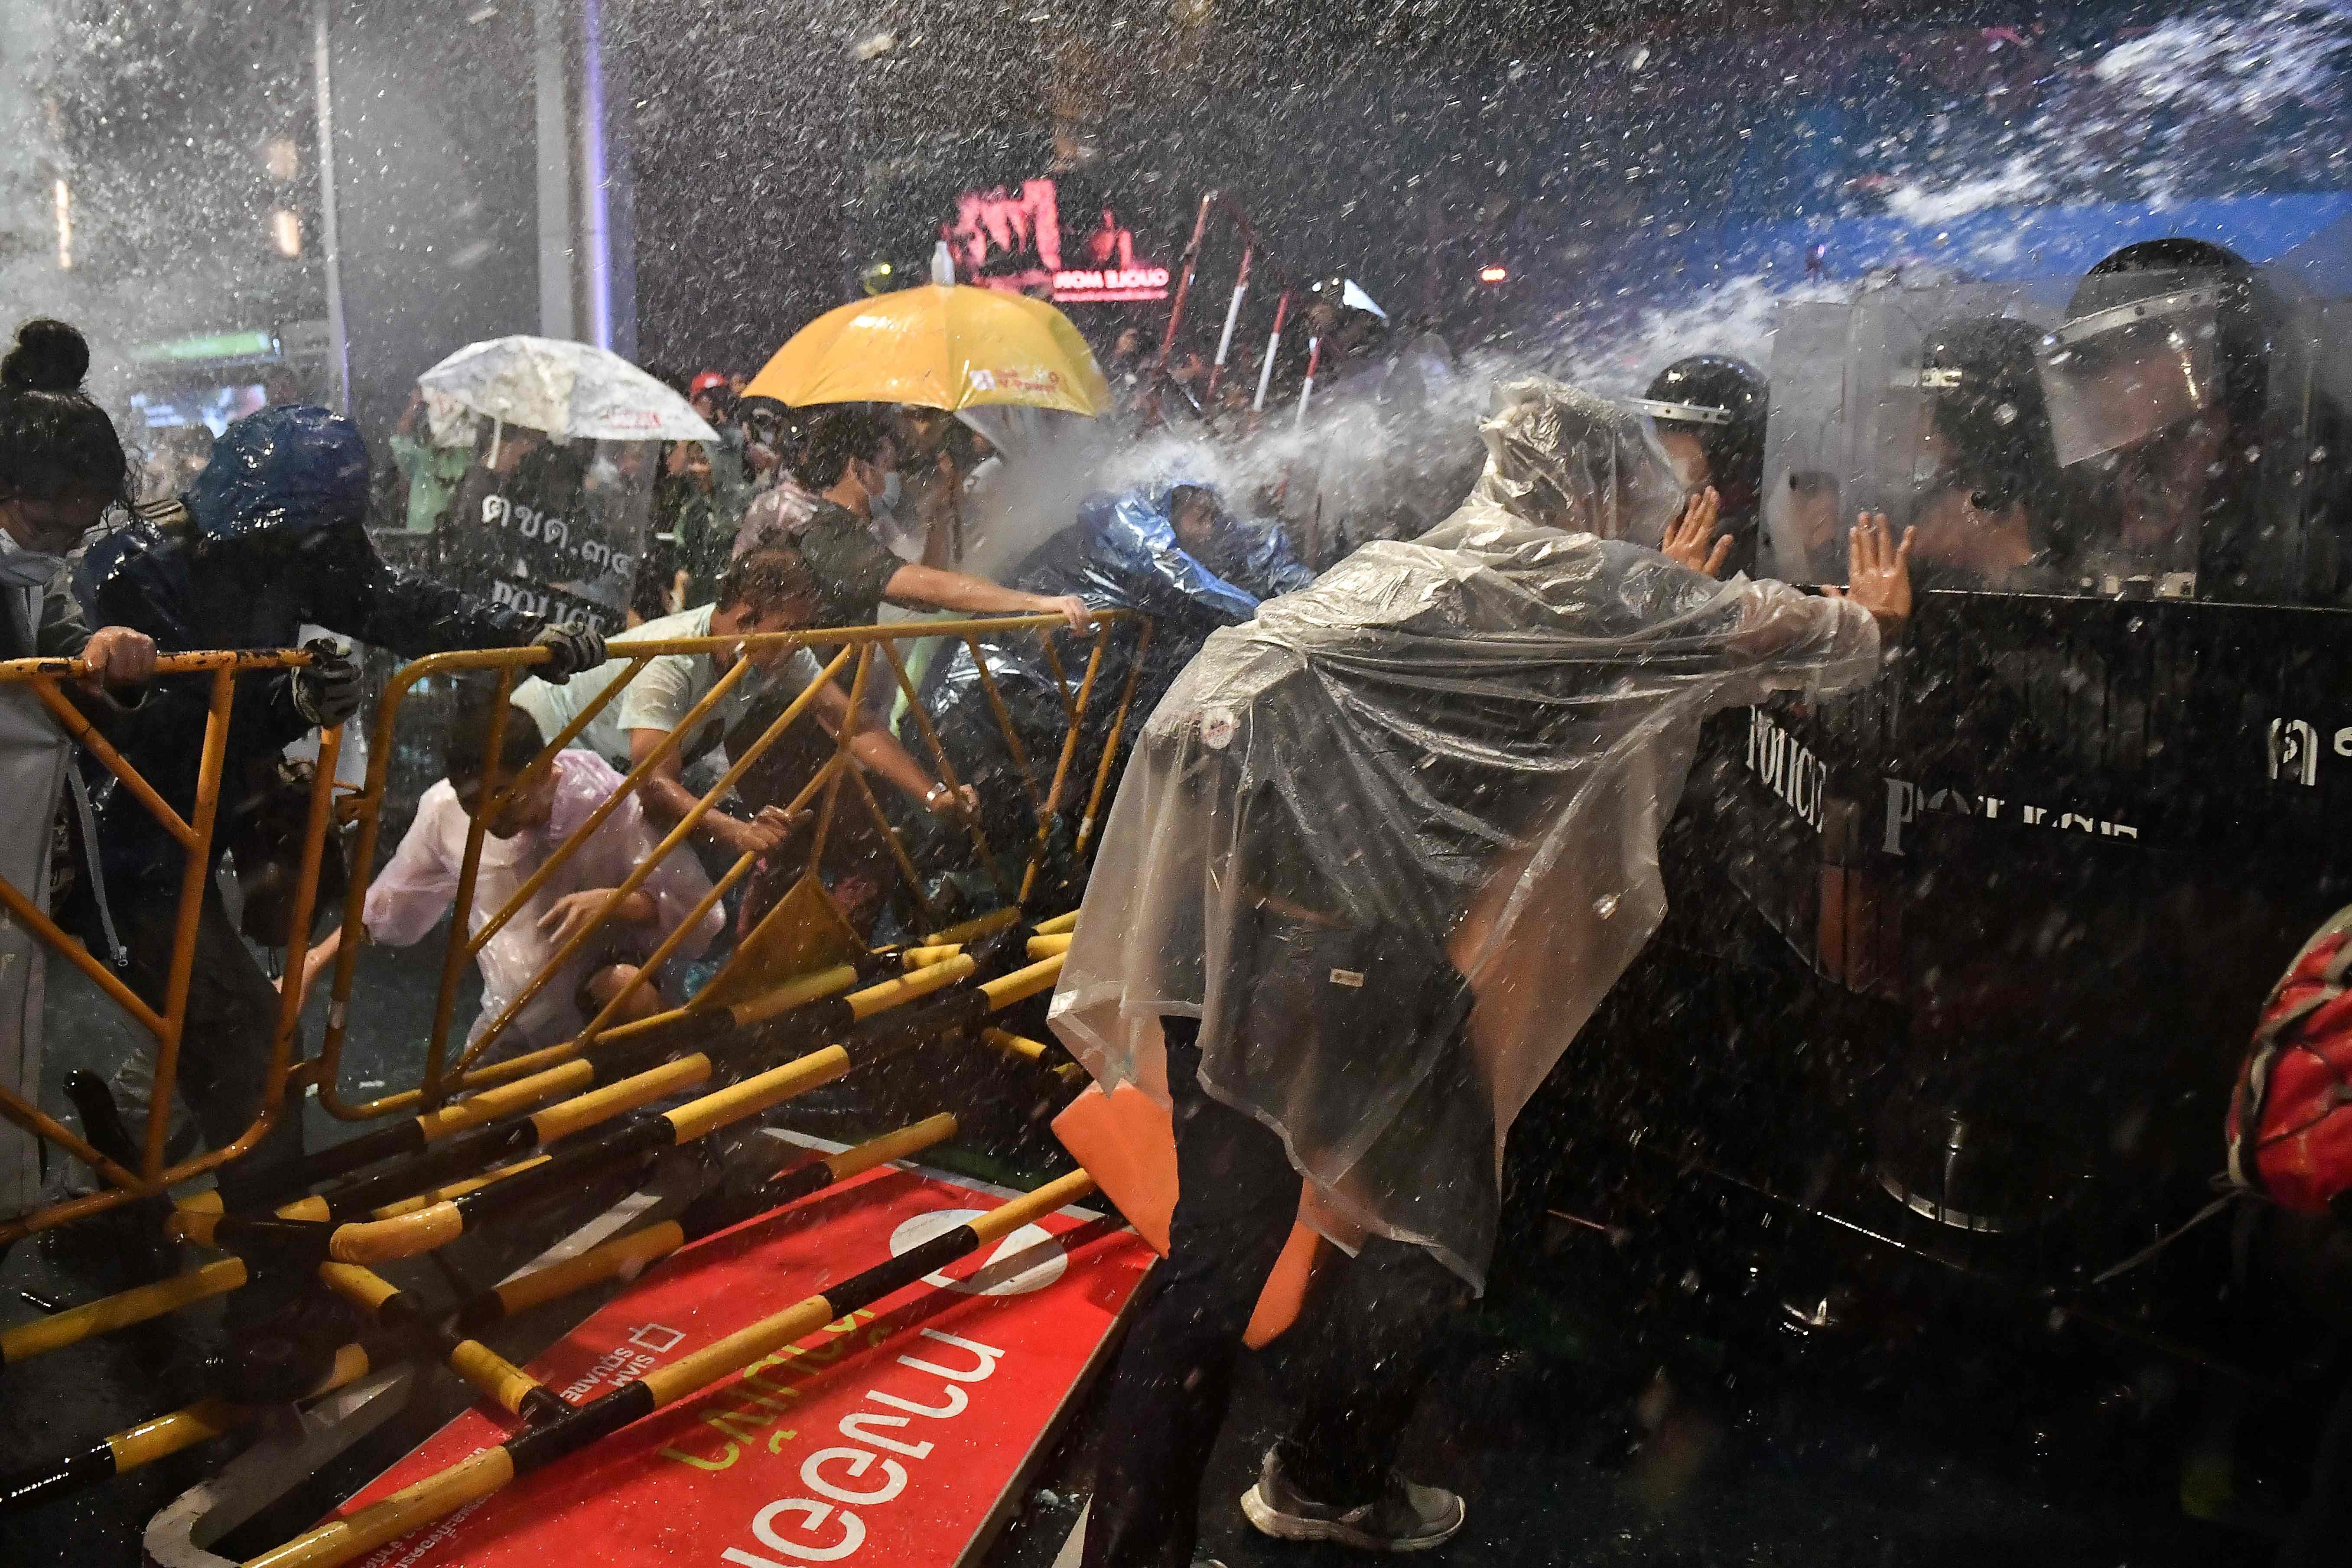 Police fire water cannons at pro-democracy protesters during an anti-government rally in Bangkok. Credit: AFP Photo